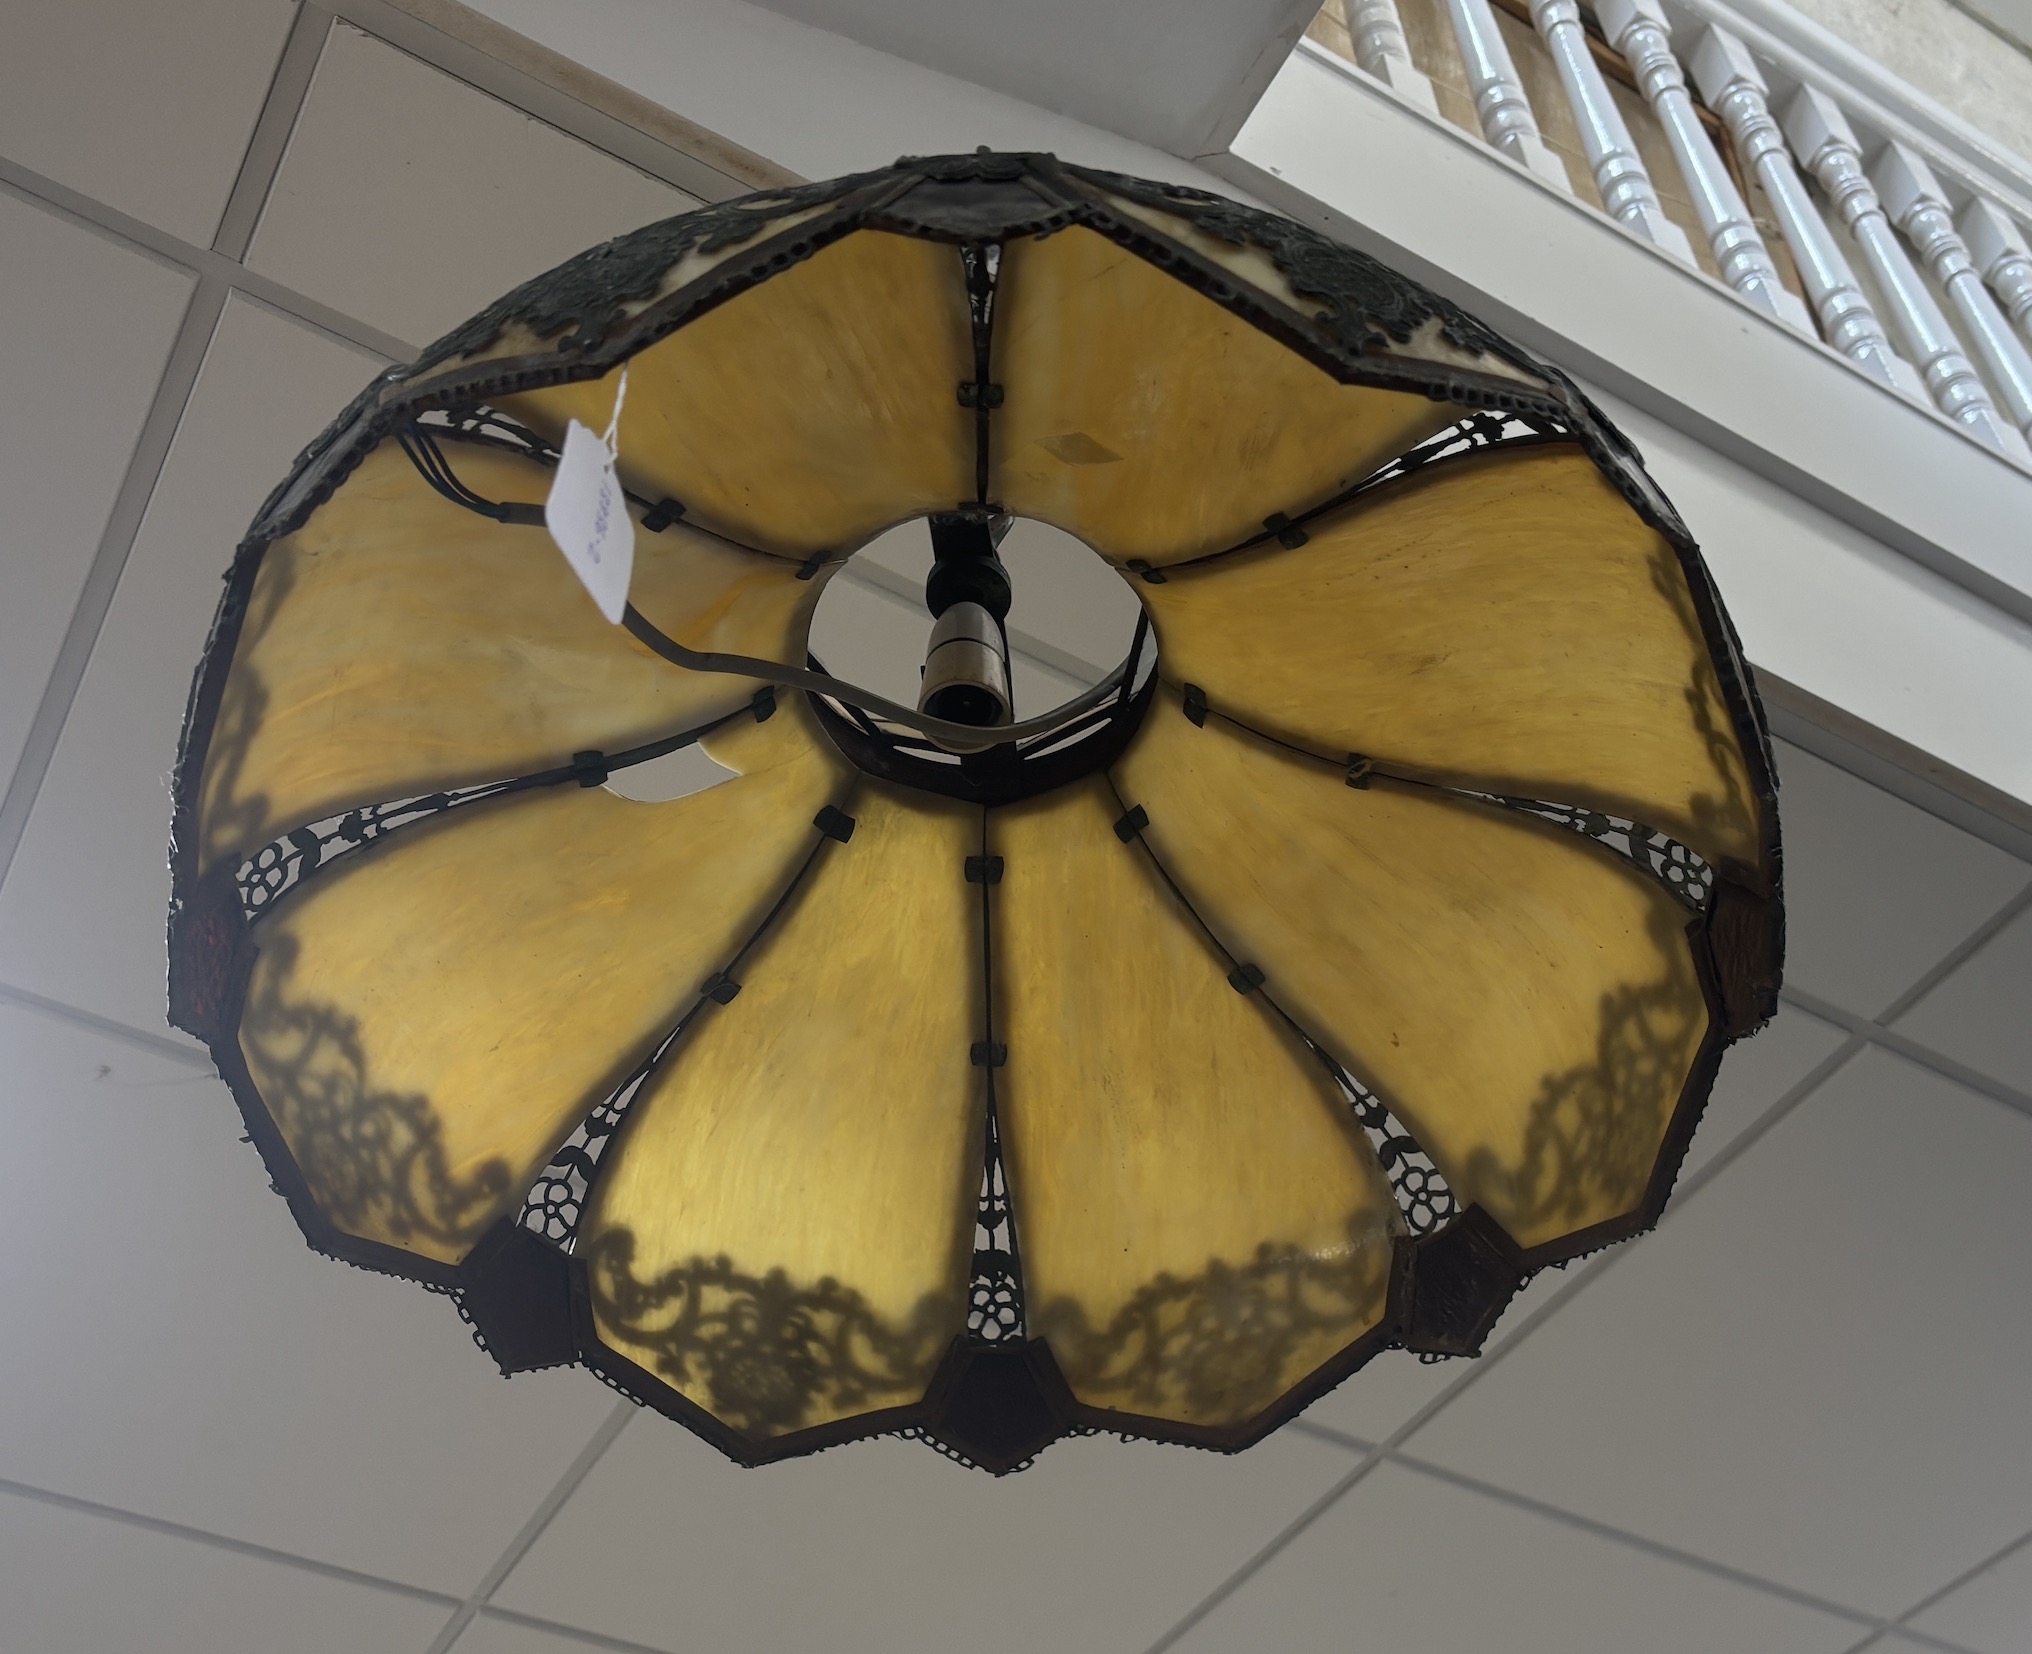 An early 20th century stained glass hanging lamp shade with applied metalwork decoration, shade 56cm diameter